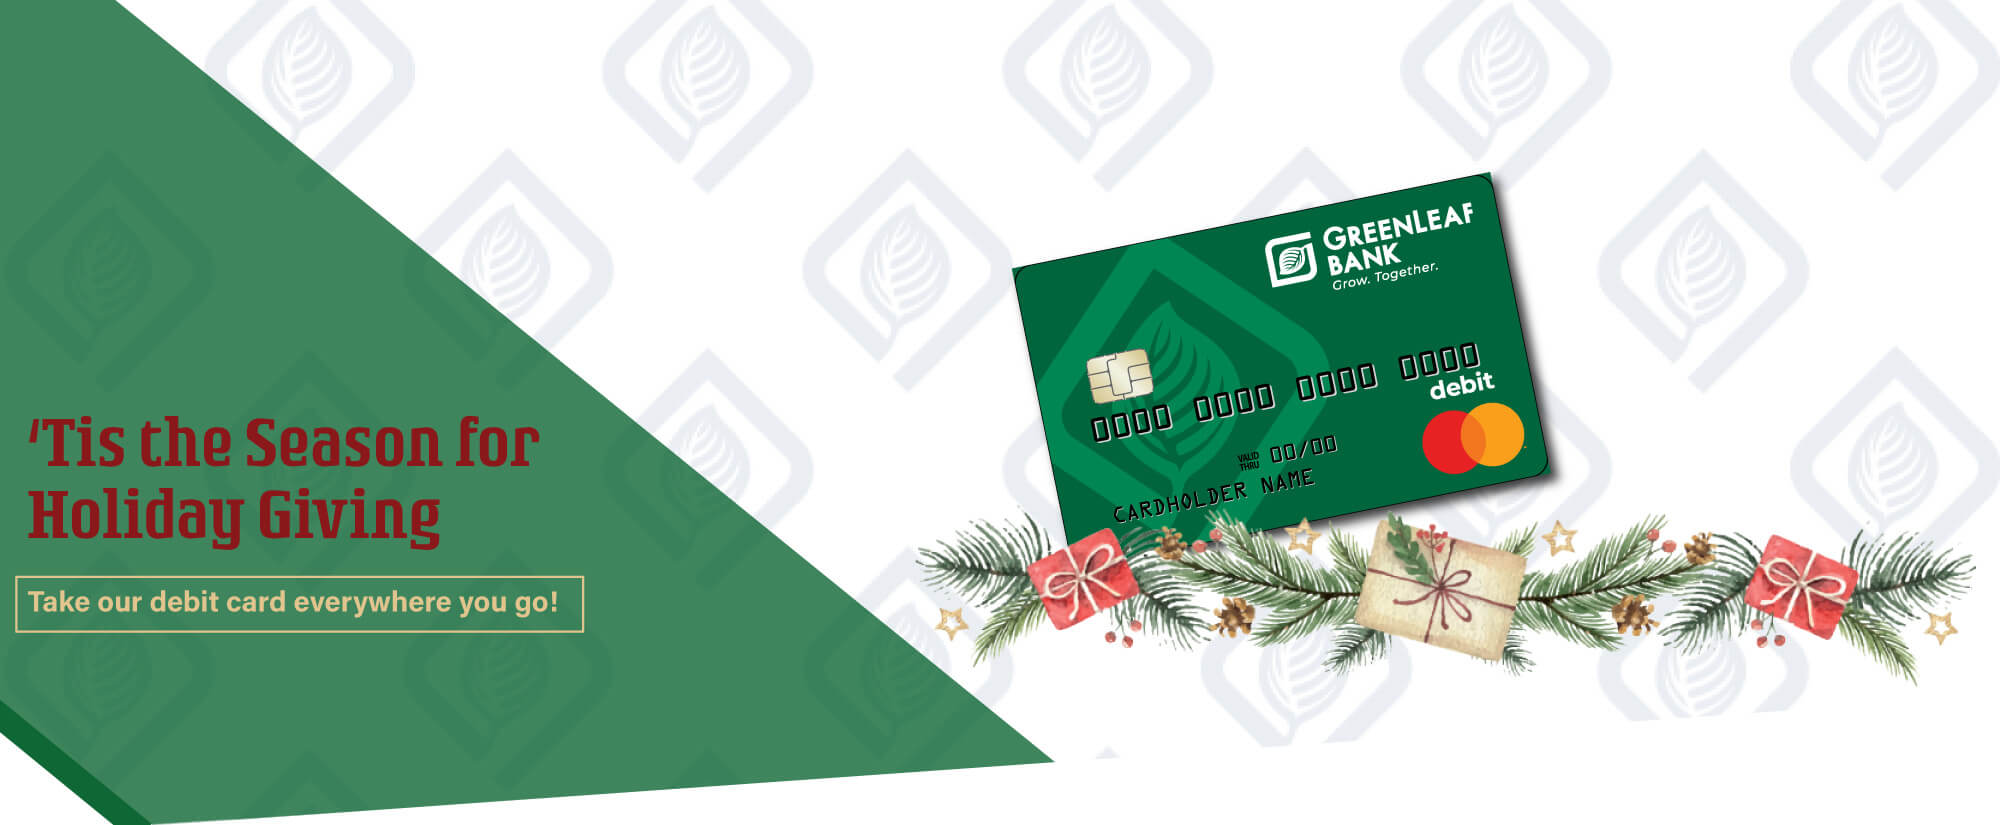 Take our debit card holiday shopping